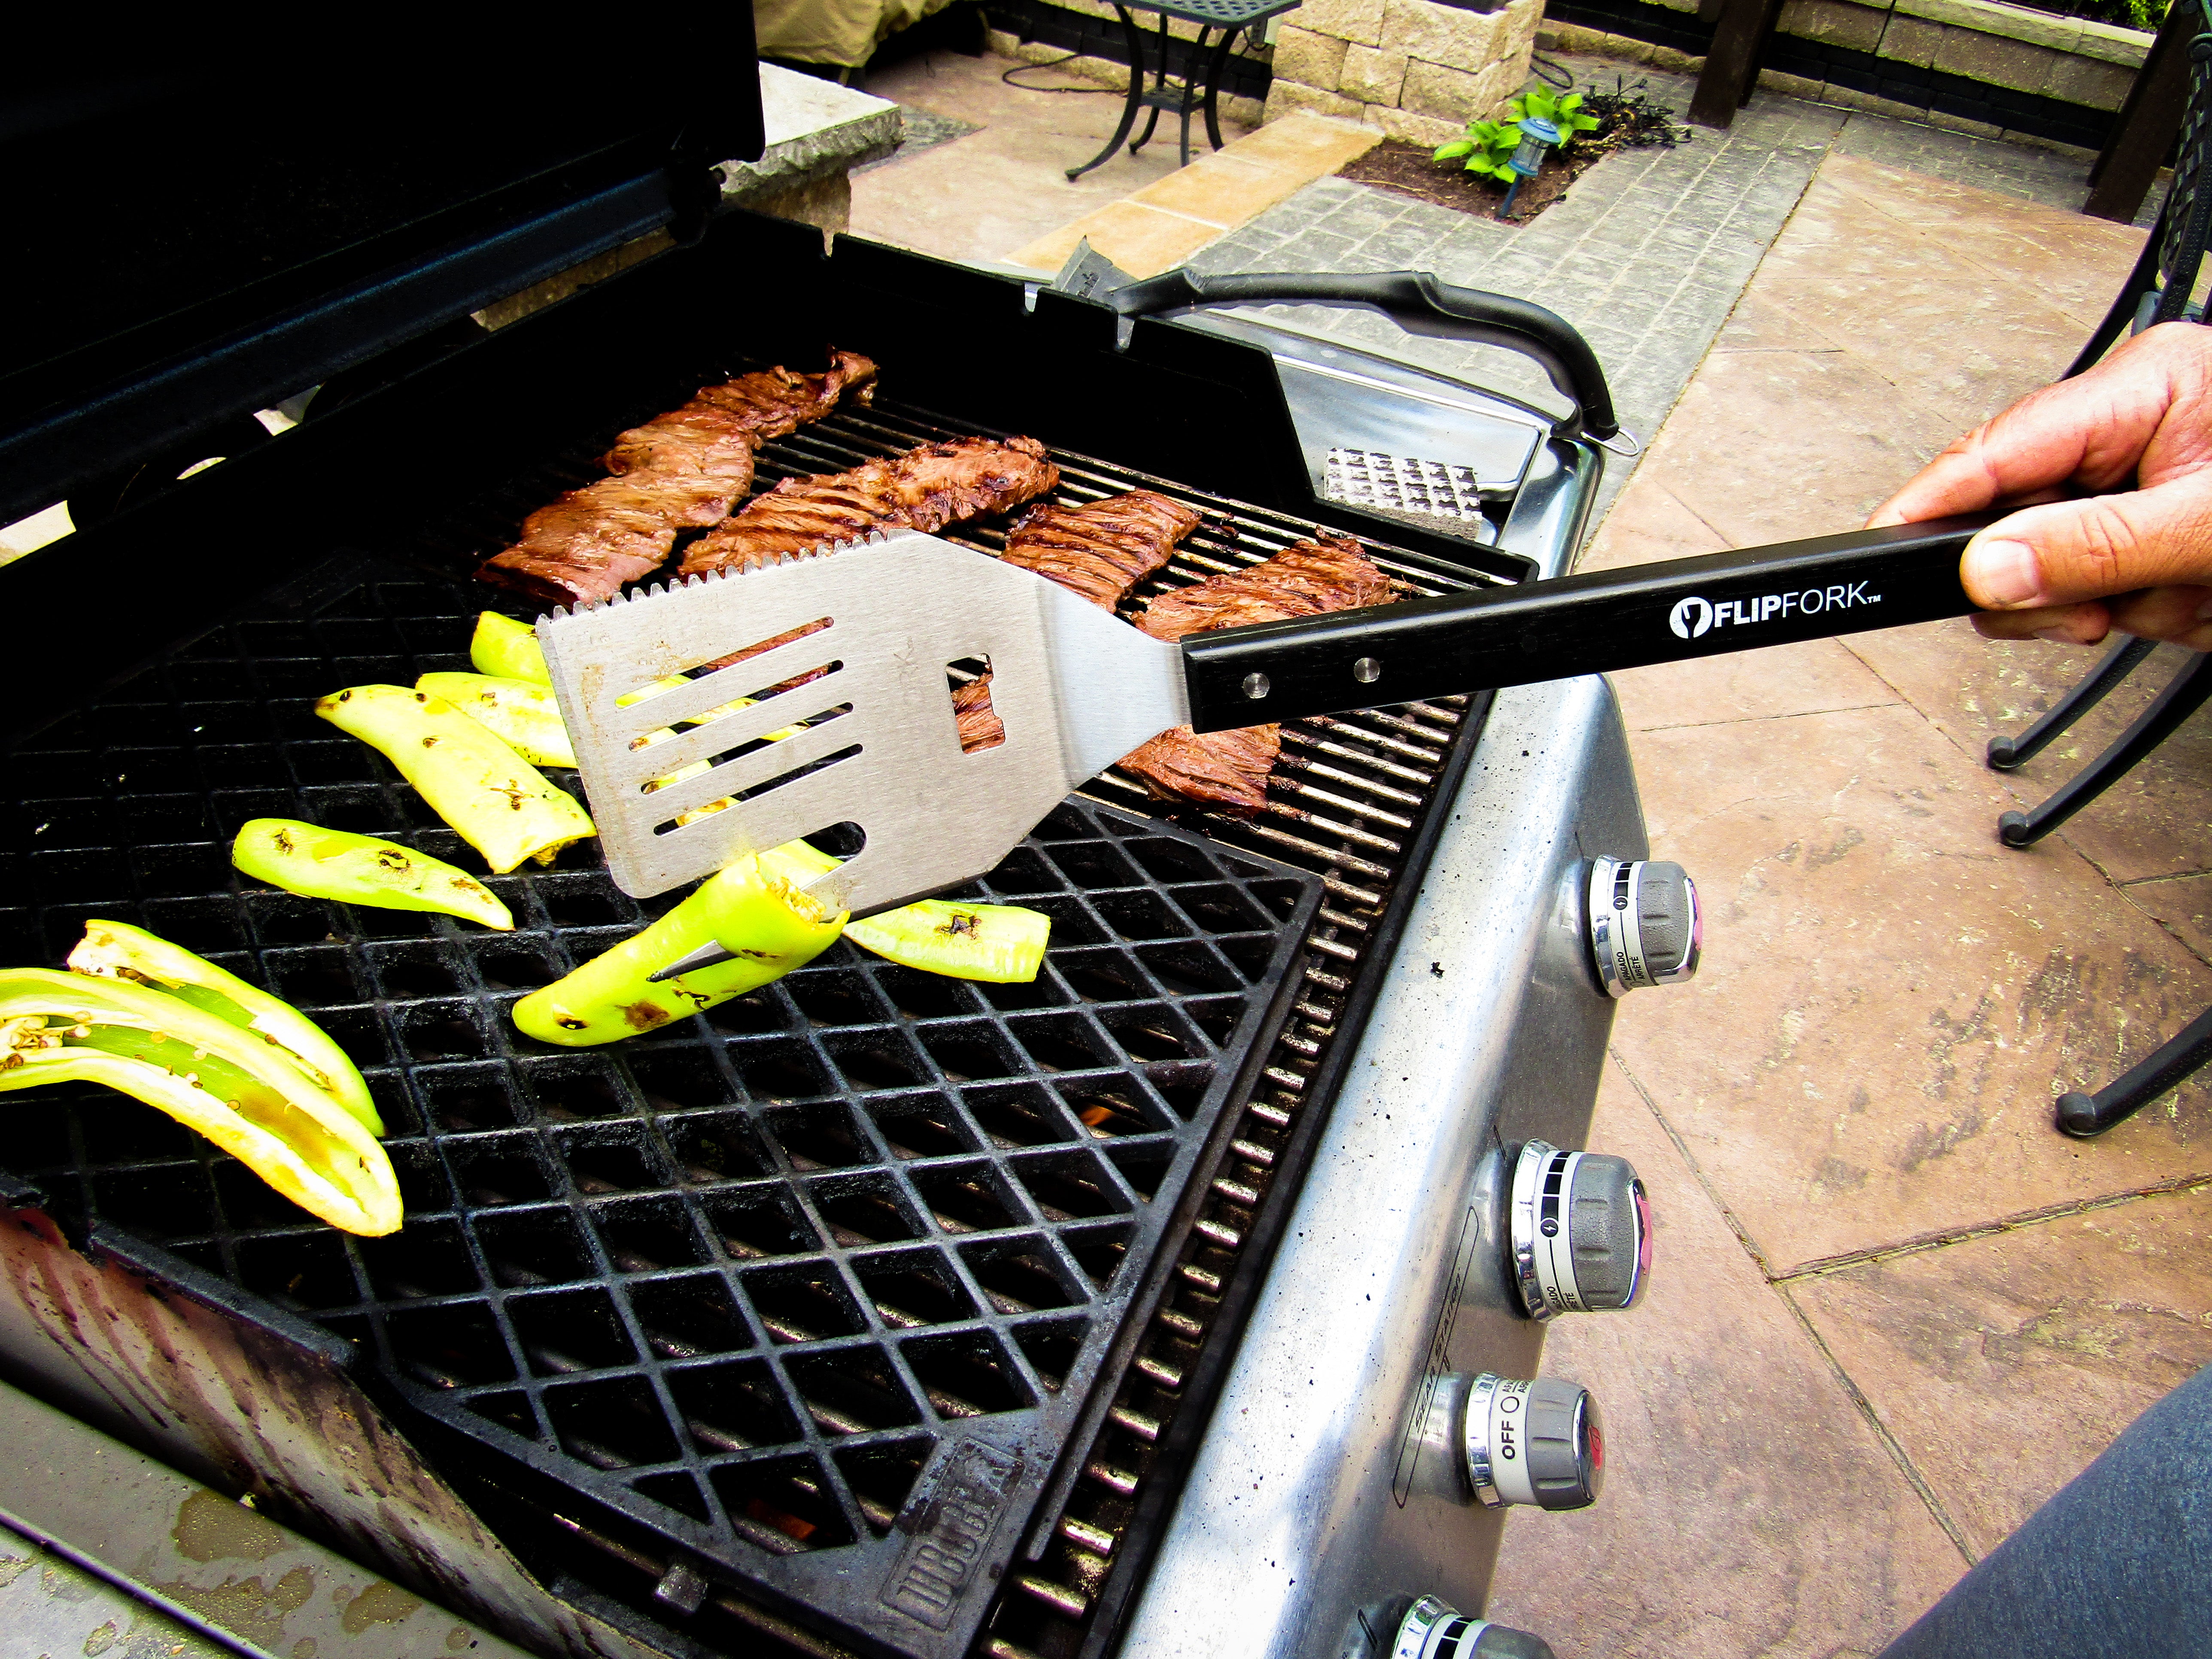 FATHERS DAY DEALS - The 5 in 1 FlipFork Boss